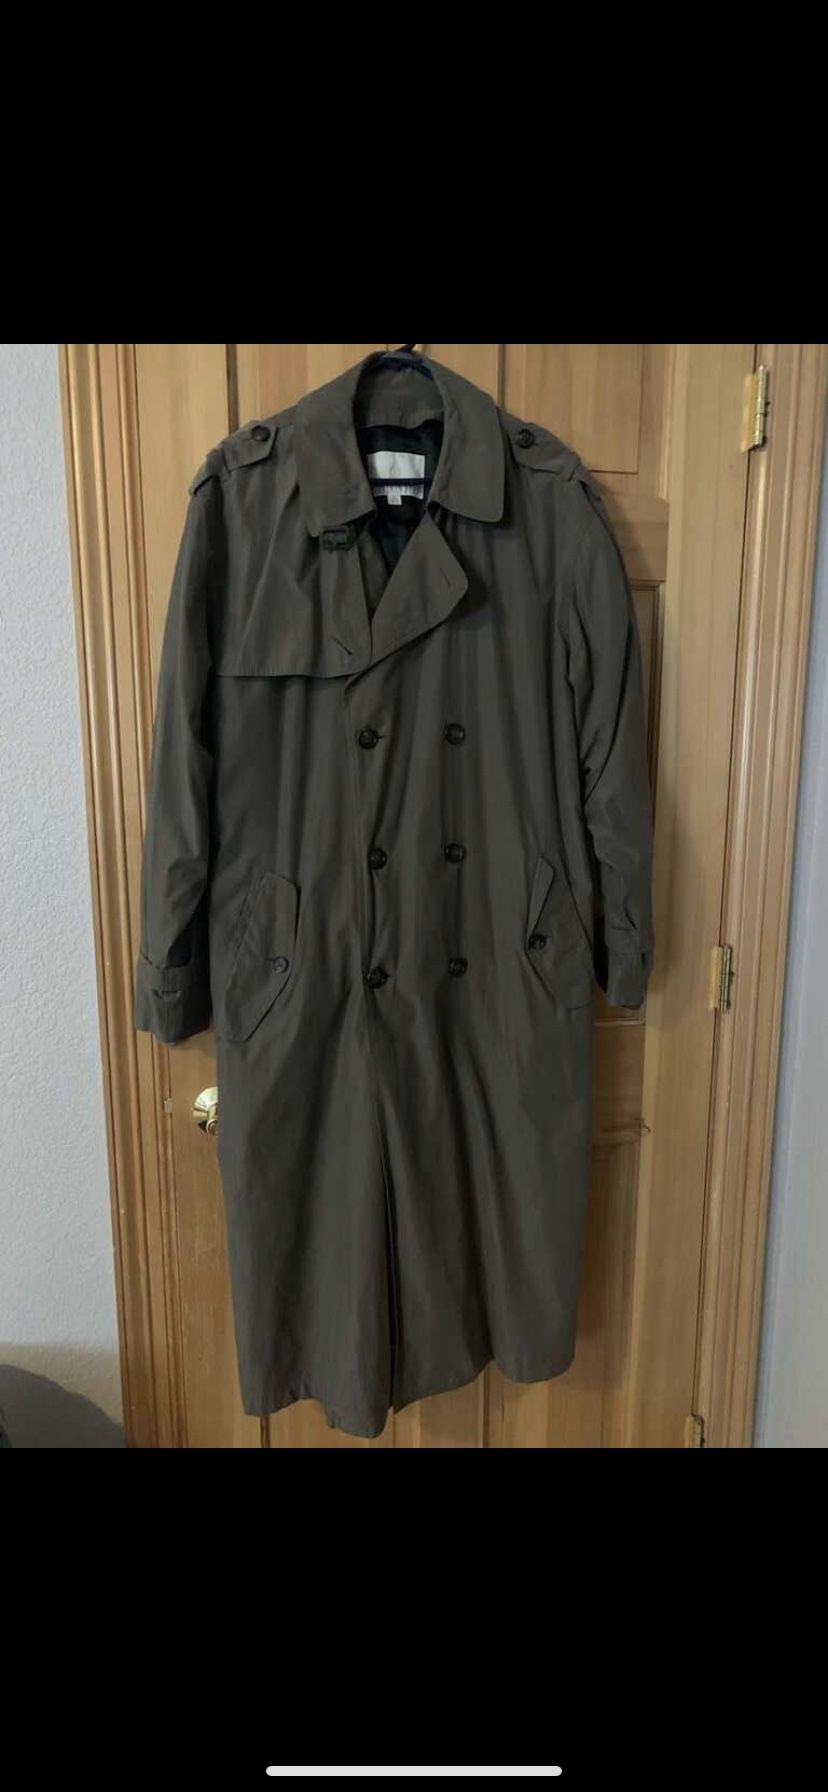 LIKE NEW CONDITION! Men’s London Fog Double-Breasted Raincoat - Size 40 Regular 